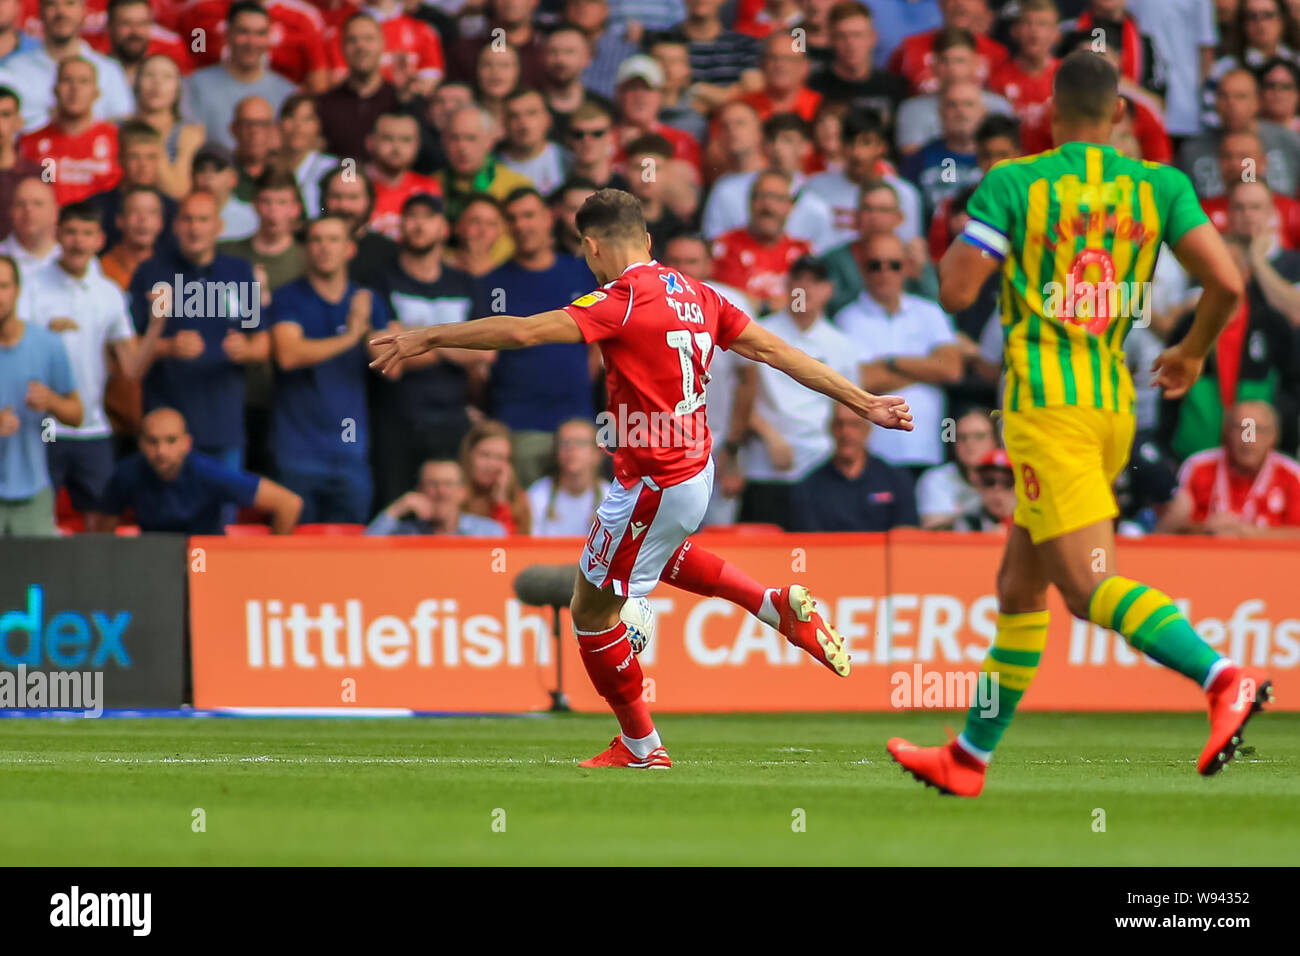 3rd August 2019, City Ground, Nottingham, England ; Sky Bet Championship, Nottingham Forest vs West Bromwich Albion :  Matty Cash (11) of Nottingham Forest  scores to make it 1-0  Credit: Craig Milner/News Images  English Football League images are subject to DataCo Licence Stock Photo